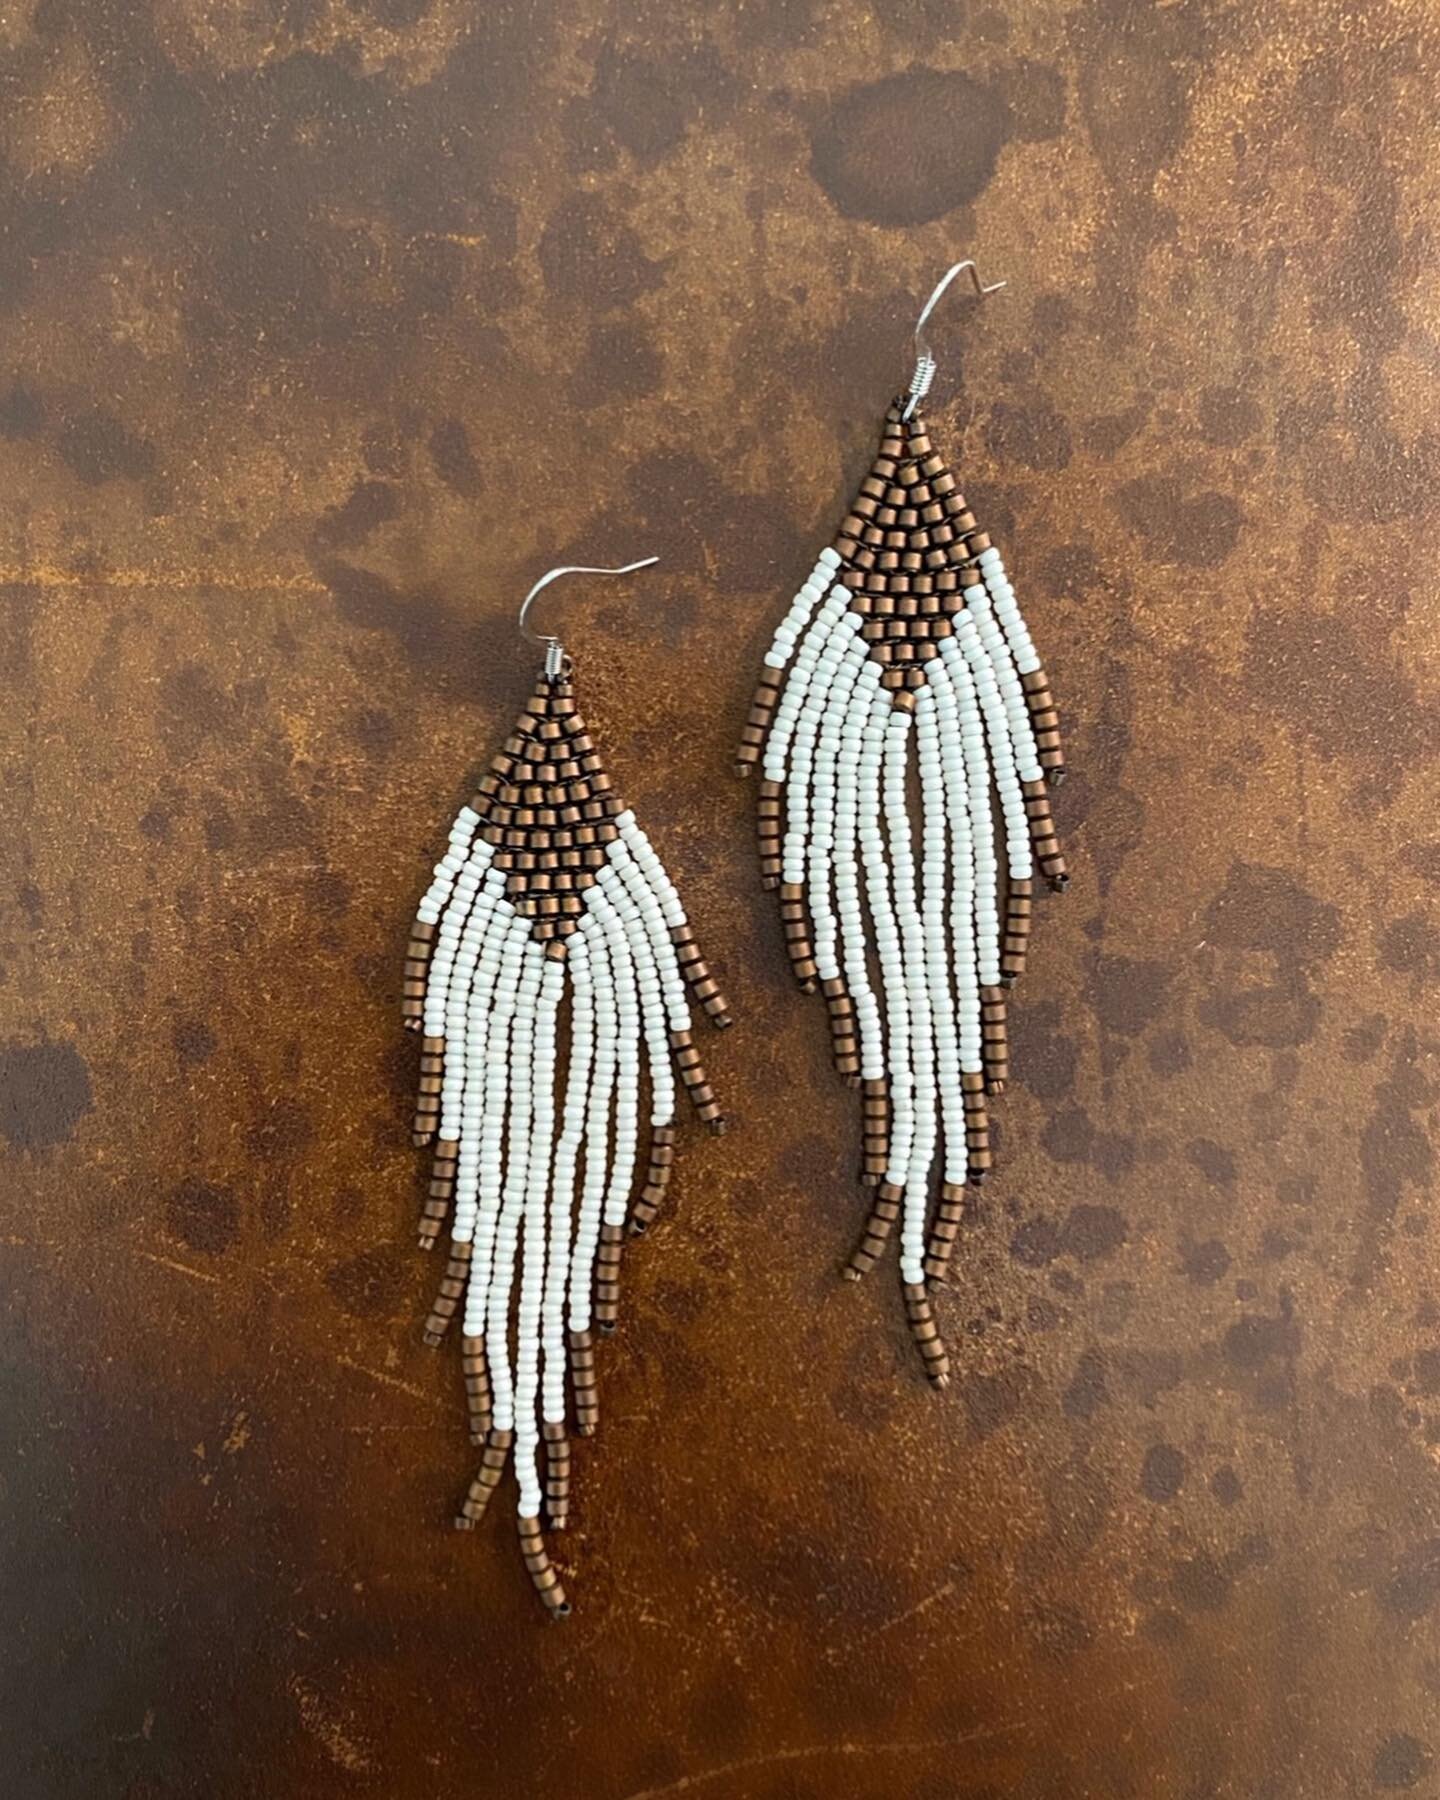 Wrapping up today&rsquo;s release with :: Tobacco Road :: beaded white and copper fringe shoulder dusters ✨See you back real soon. XO, Kara
.
.
.
#roadworn #roadwornhandmade #handmade #fringe #fringeearrings #beadedjewelry #copperearrings